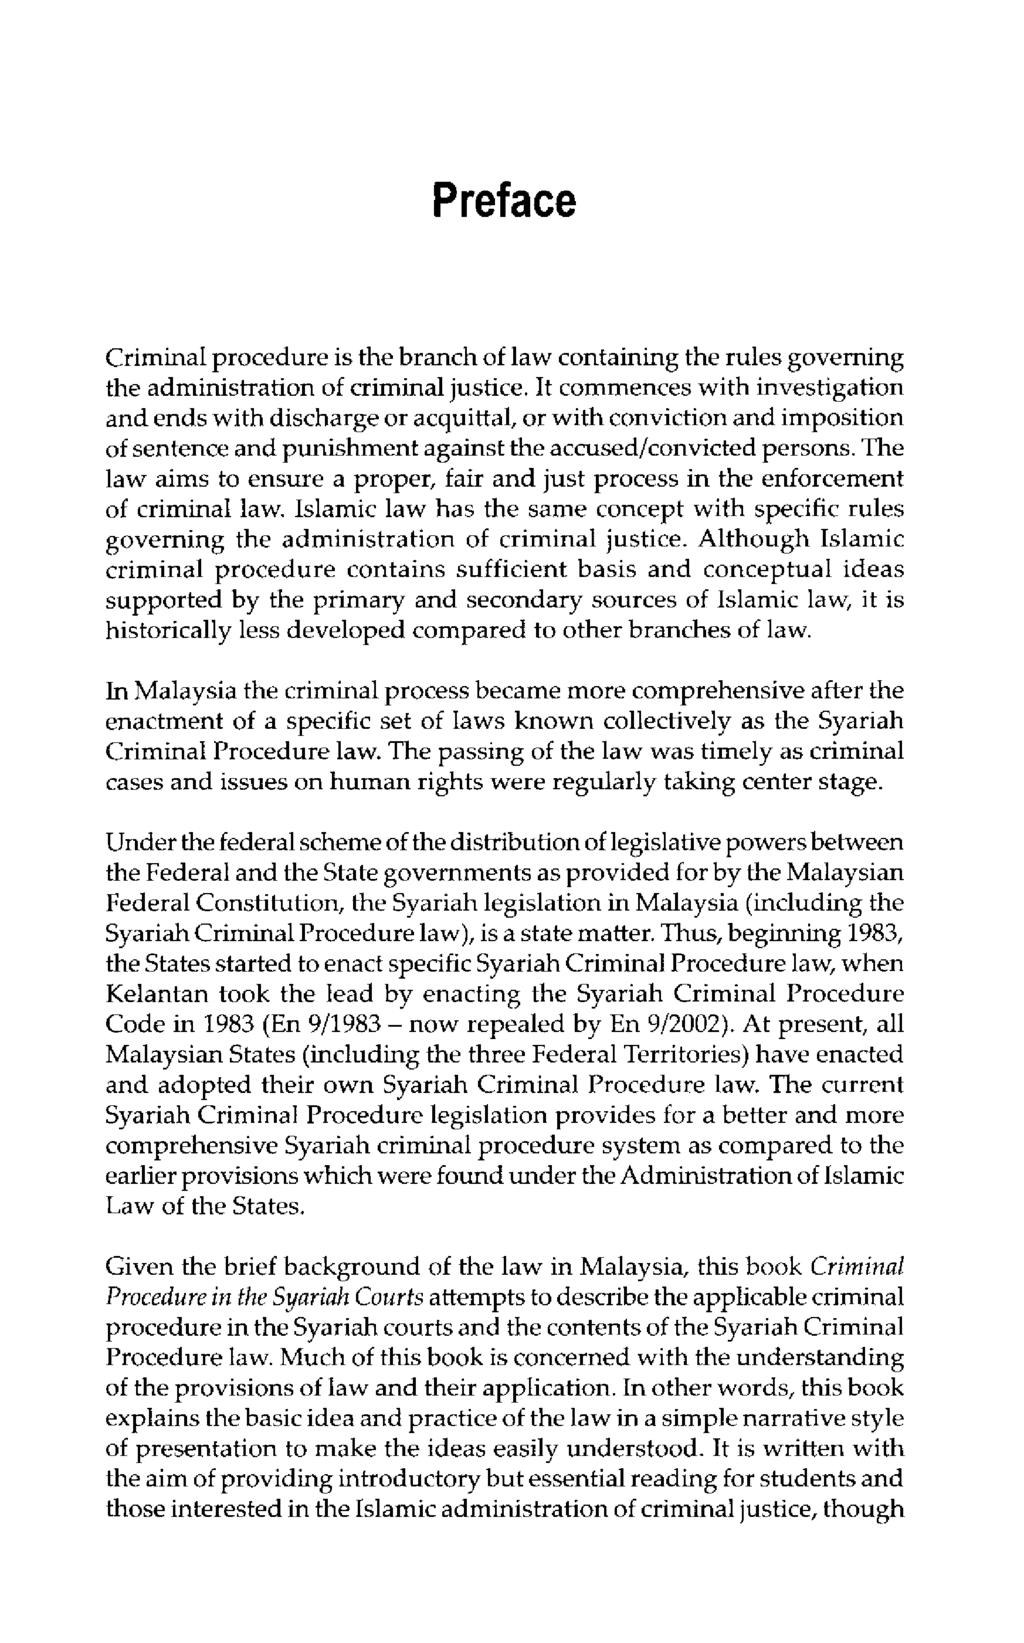 Preface Criminal procedure is the branch of law containing the rules governing the administration of criminal justice.